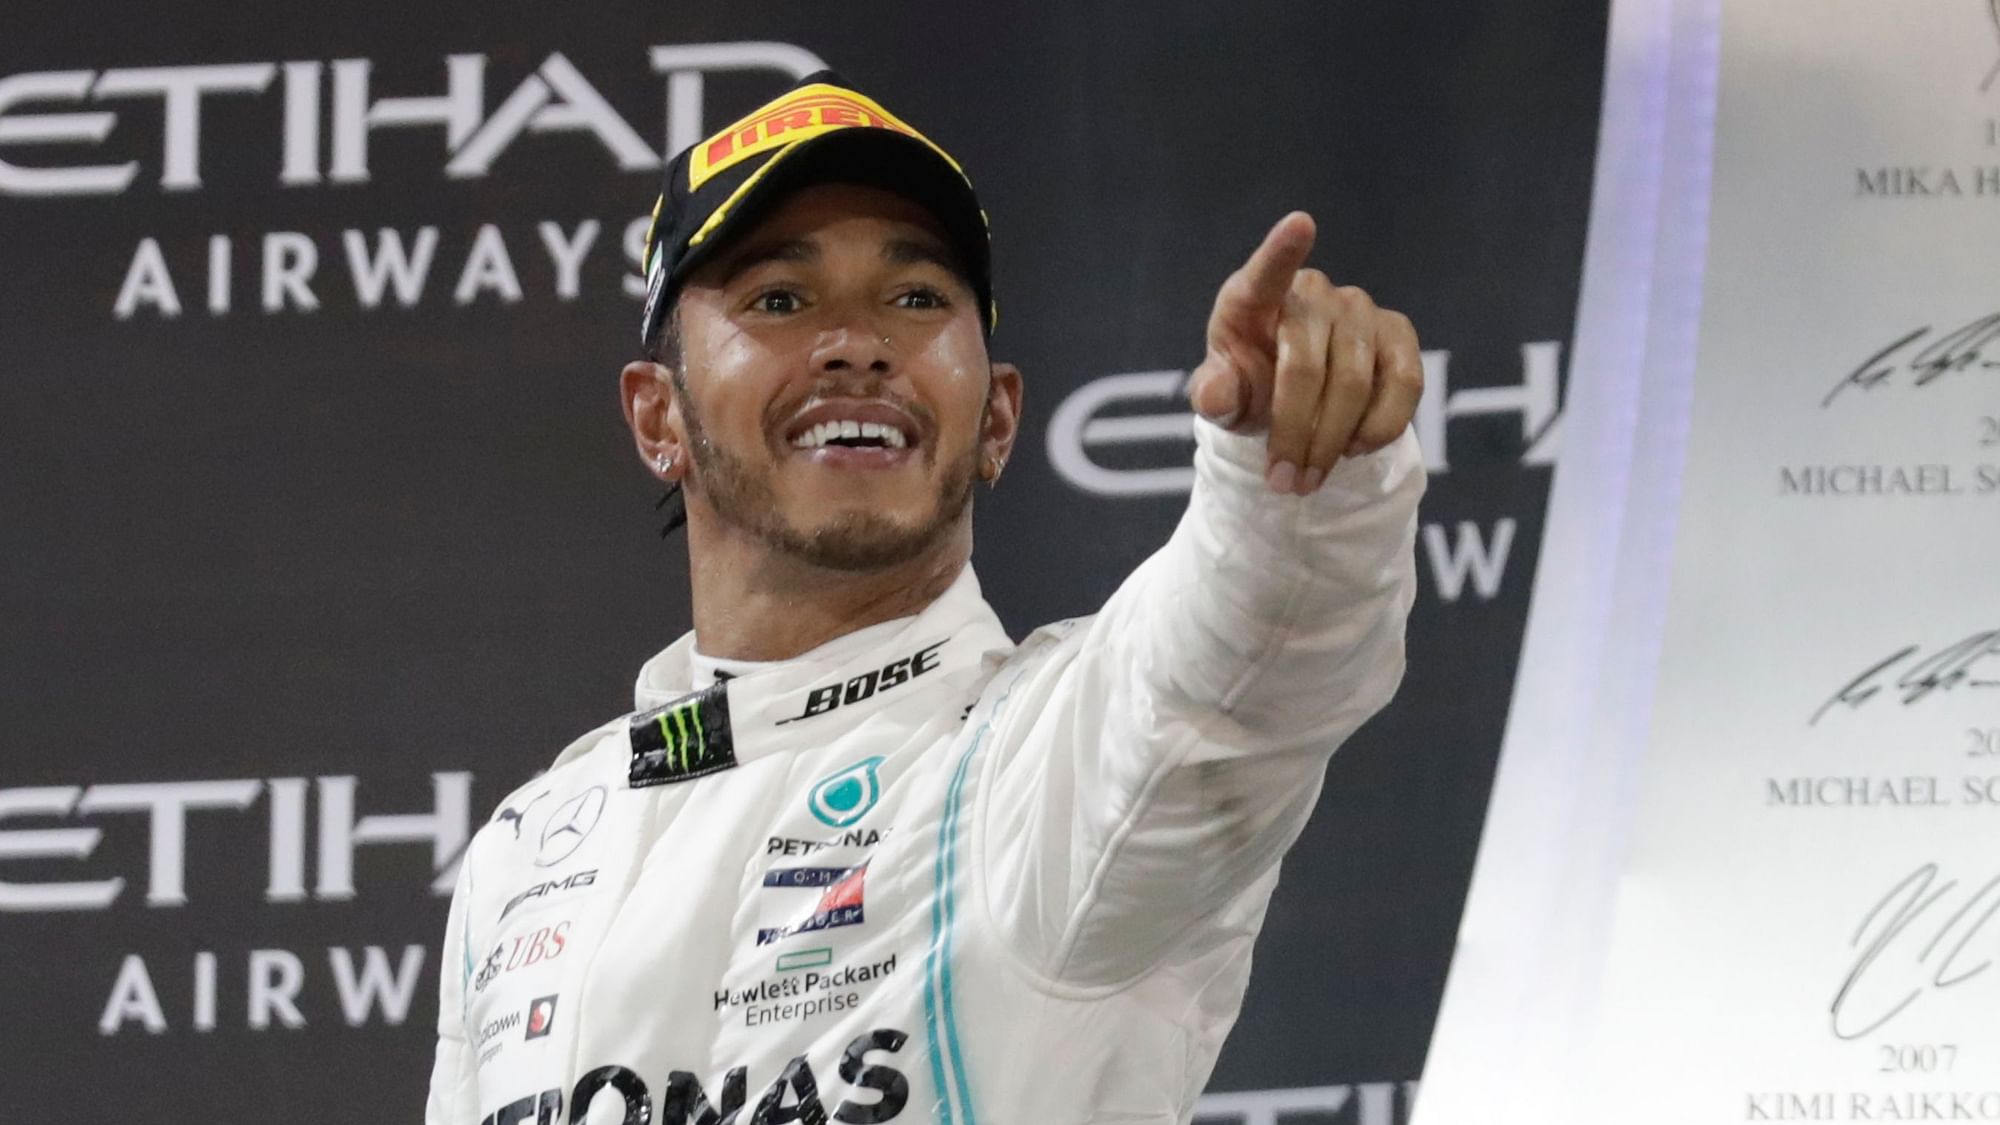 The 34-year-old Hamilton, who comes to the end of his Mercedes contract next season, will be bidding for a record-equalling seventh world title in 2020.